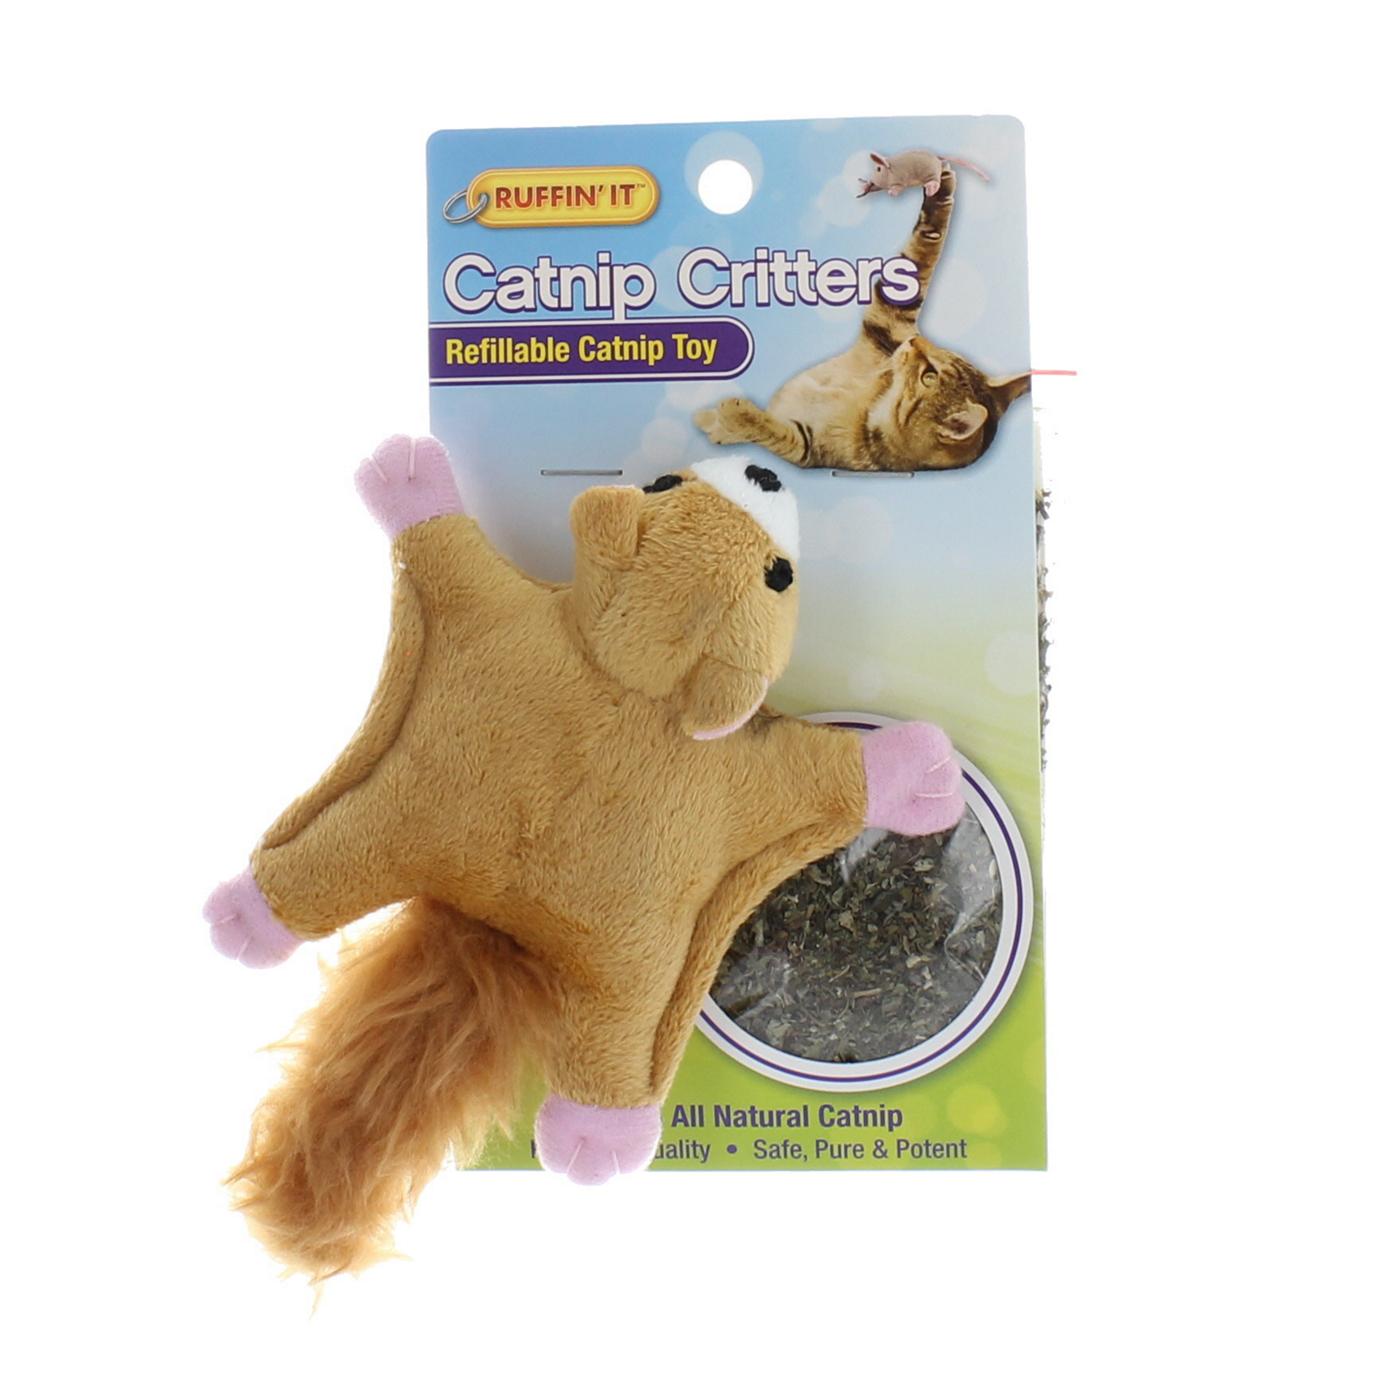 Ruffin' It Catnip Critters Refillable Catnip Toy, Assorted Characters; image 2 of 3